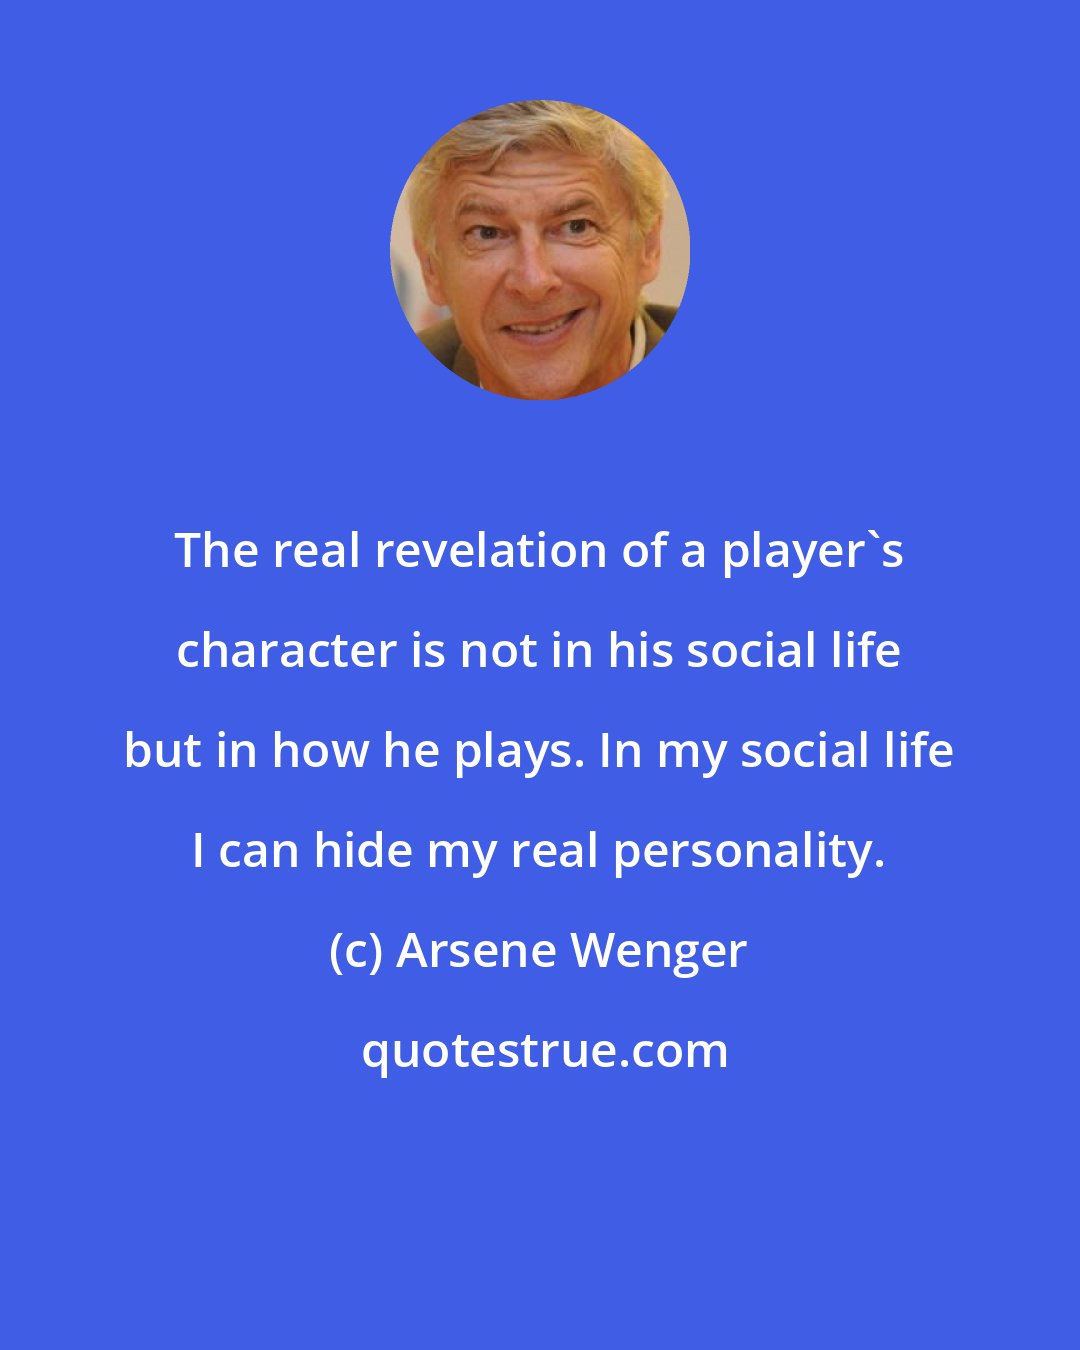 Arsene Wenger: The real revelation of a player's character is not in his social life but in how he plays. In my social life I can hide my real personality.